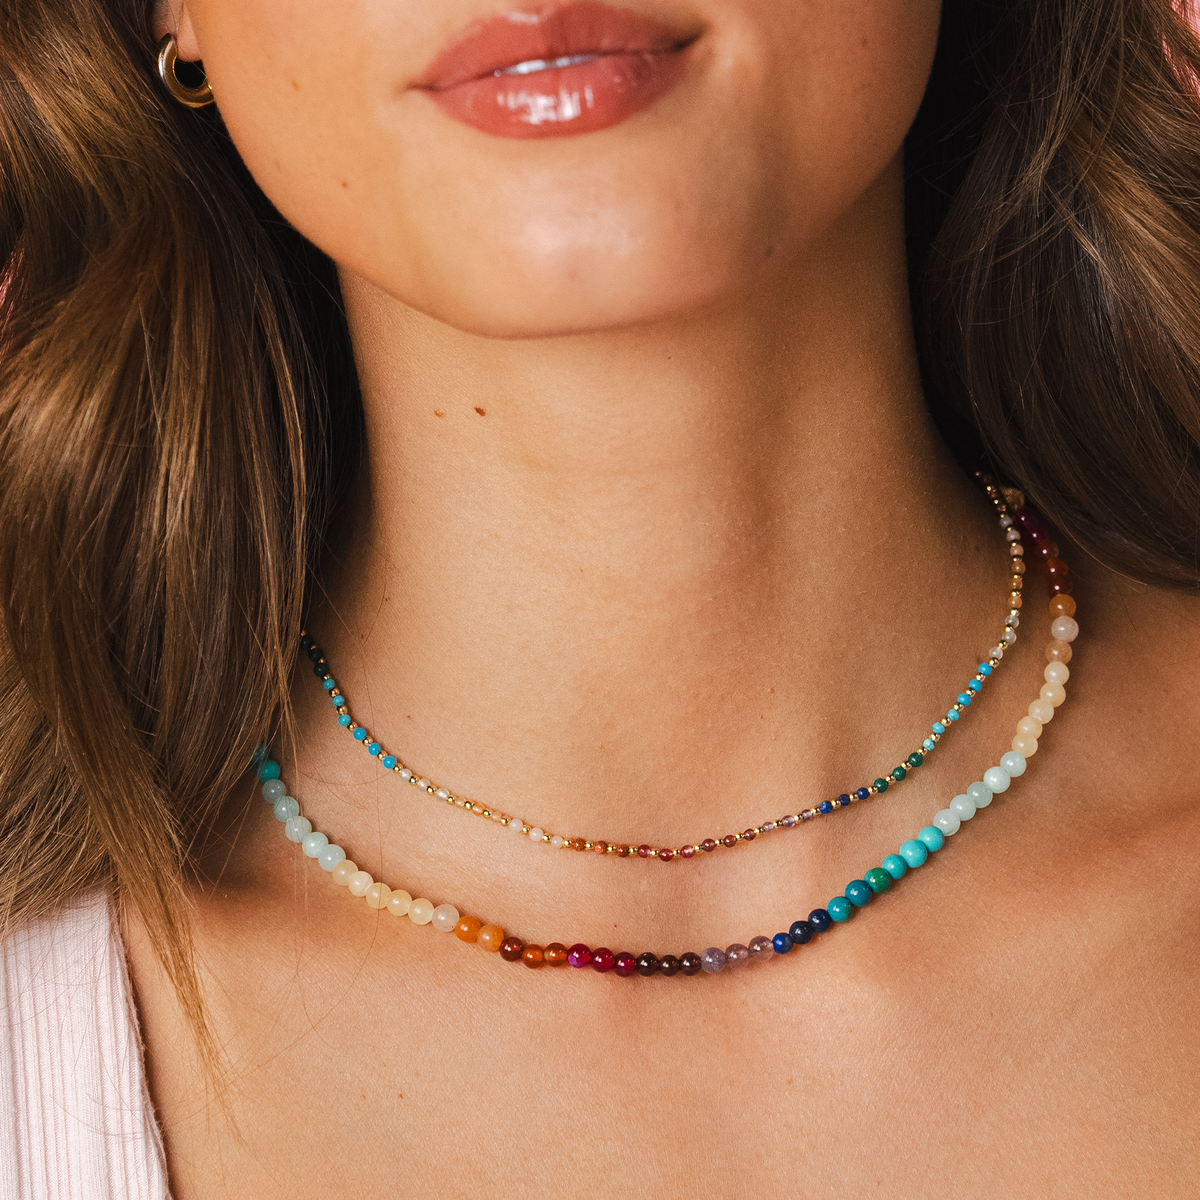 Model wearing a healing necklace stack. The necklaces include a 2mm multicolor stone and gold bead healing necklace and a 4mm multicolor stone healing necklace